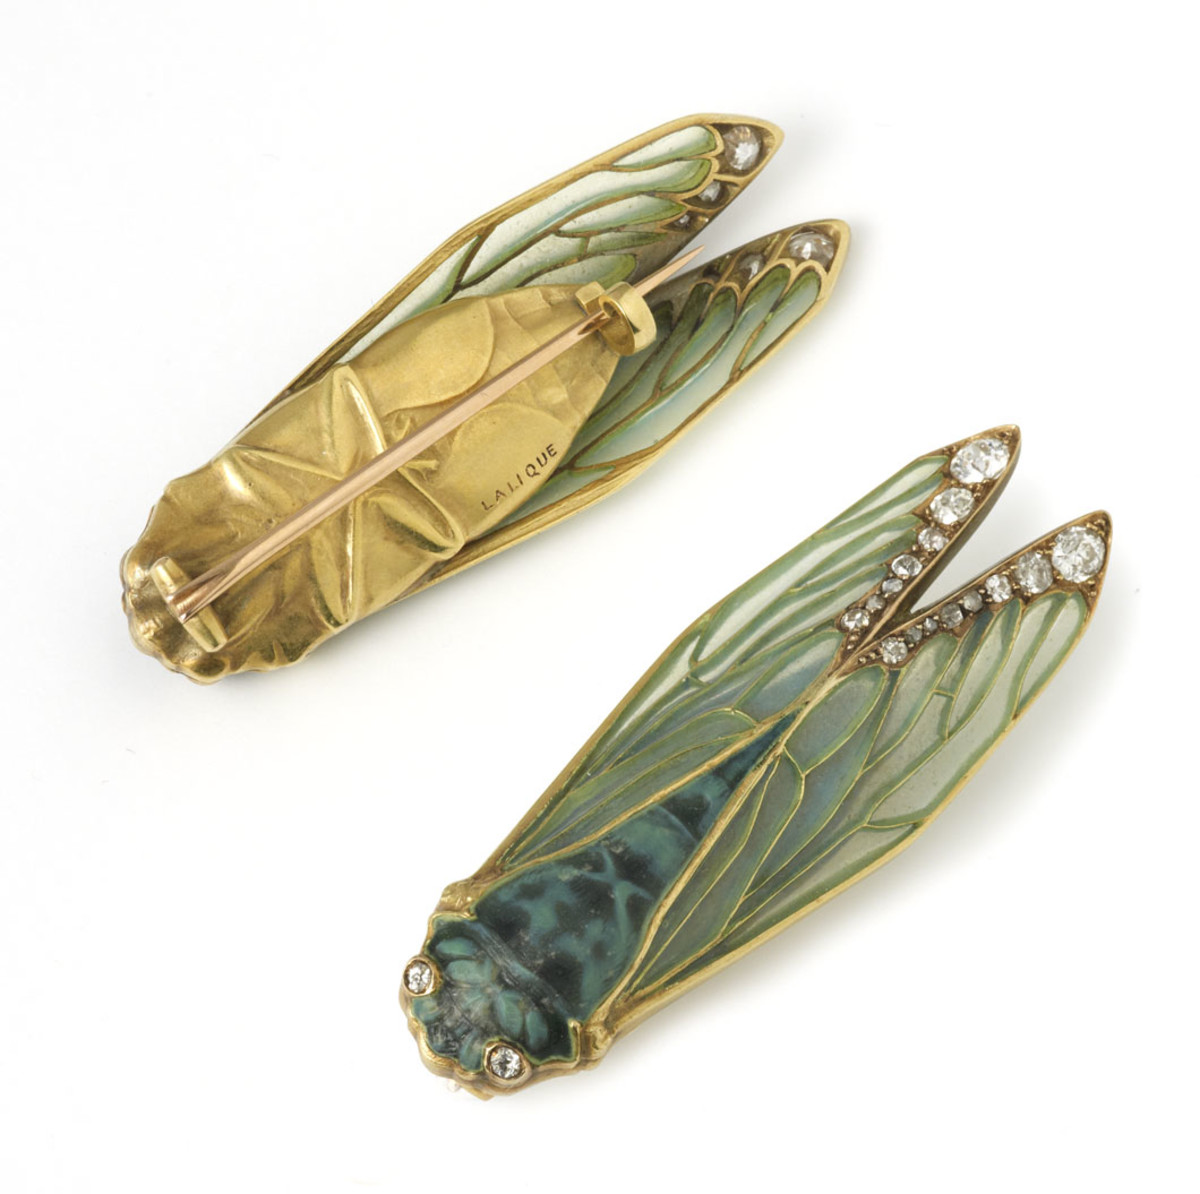 René Lalique cicada brooch, c.1905, faithfully capturing every detail of the insect. Its delicate wings decorated with translucent green plique-à-jour enamel, the tips mounted with old European-cut diamonds, the body in rich mottled blue/green glass, and the eyes set with diamonds in gold collets; the reverse is chased yellow gold.